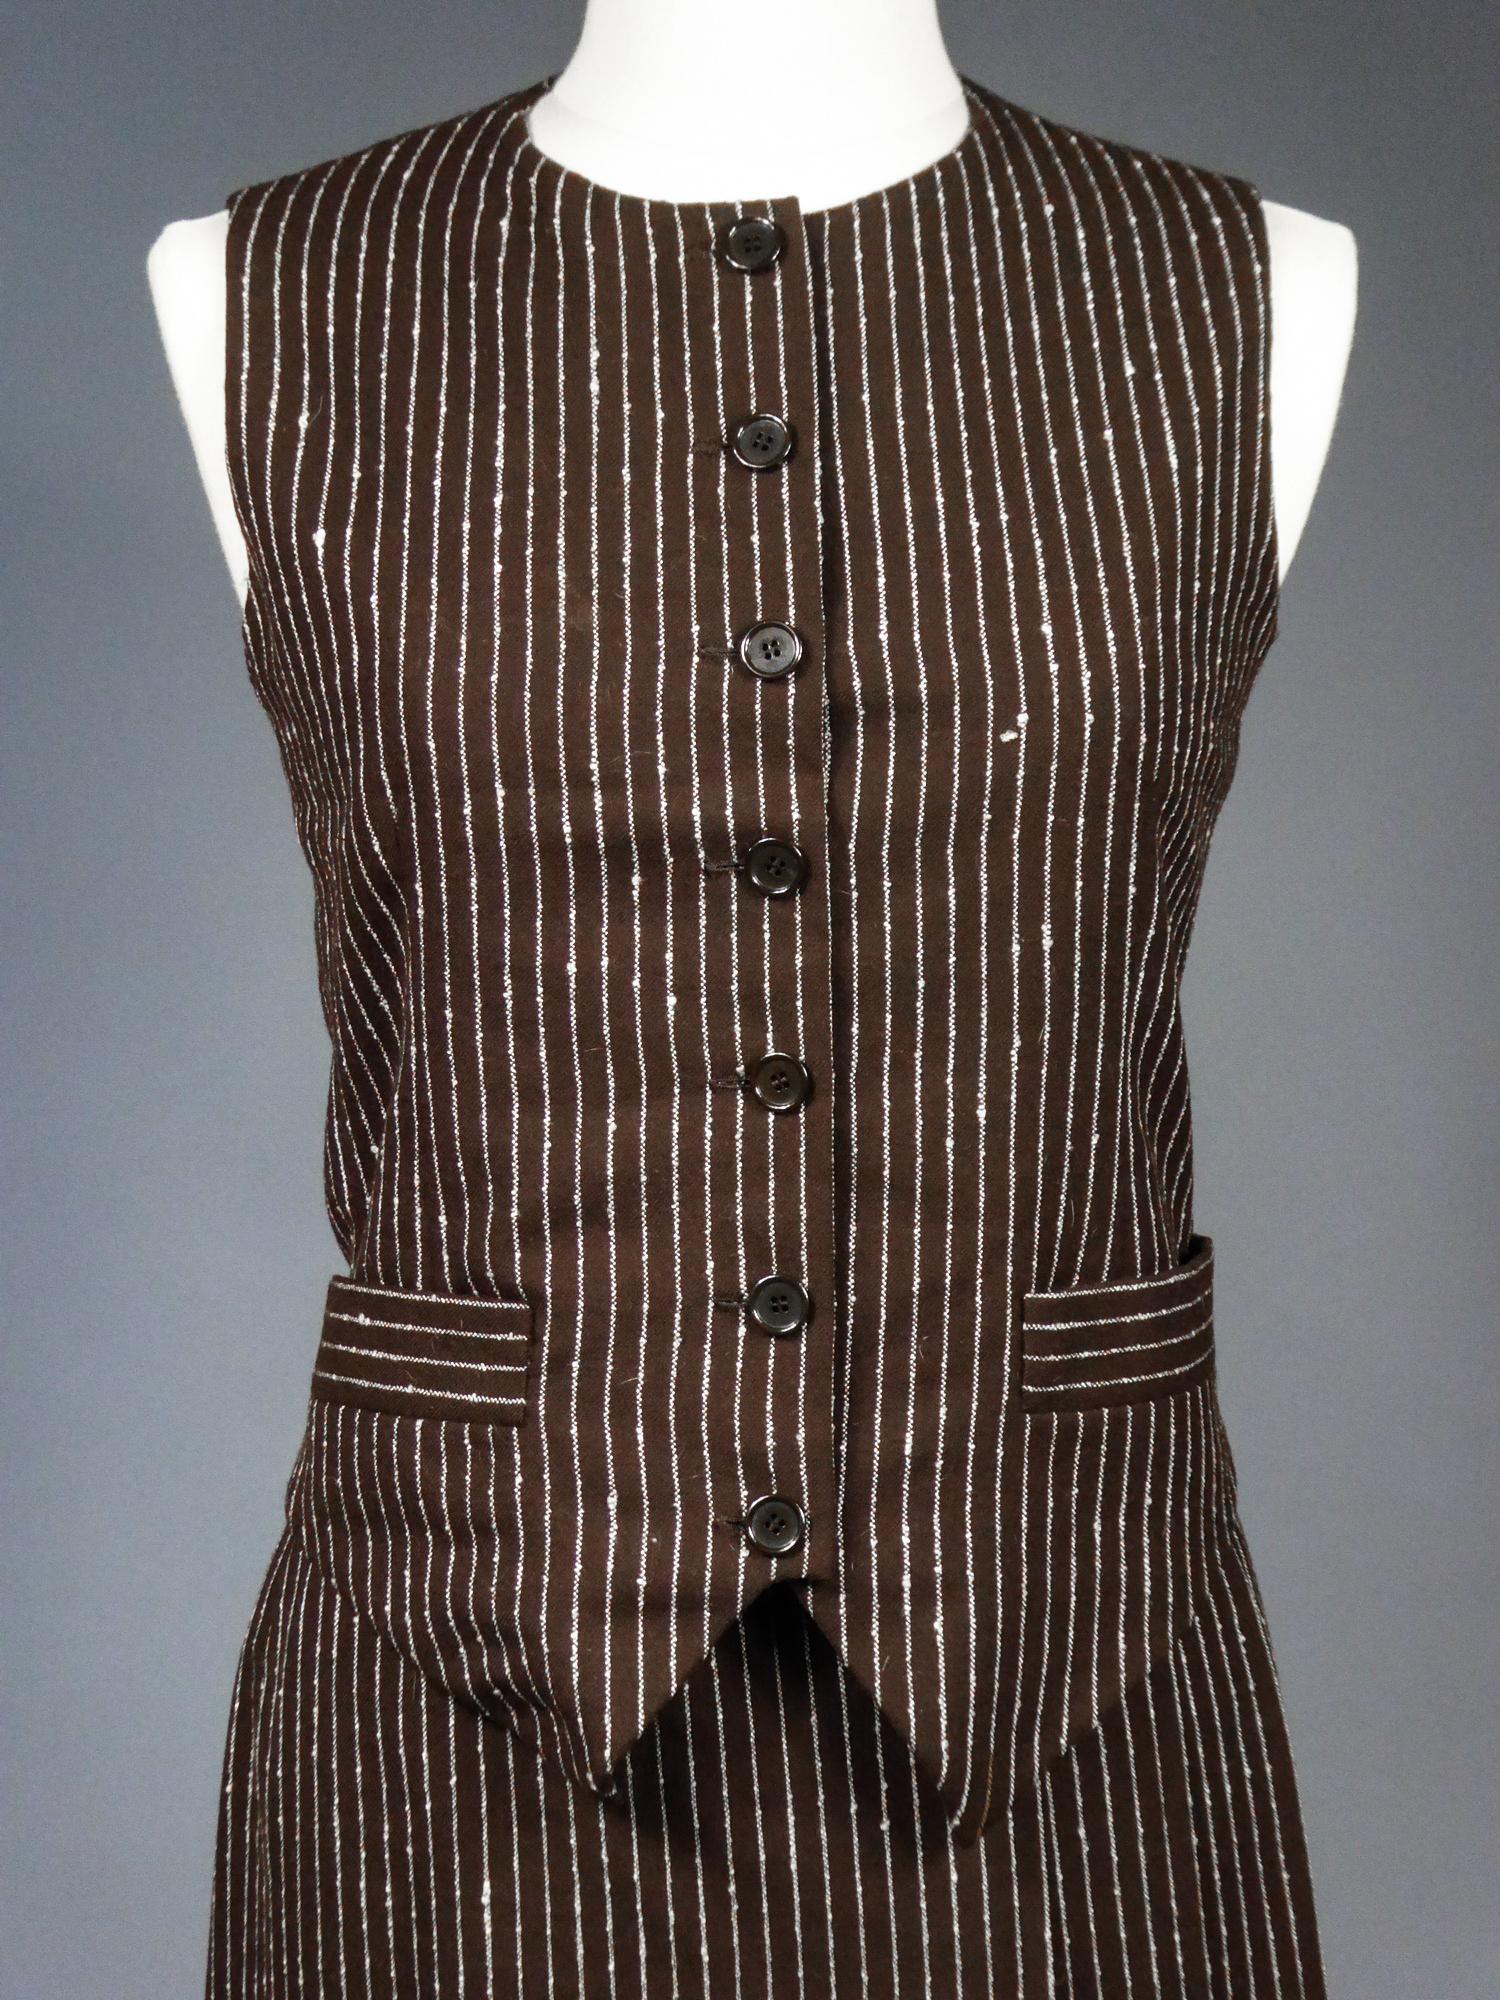 Yves Saint Laurent Haute Couture skirt-suit numbered 14539 Circa 1967/1970 For Sale 7